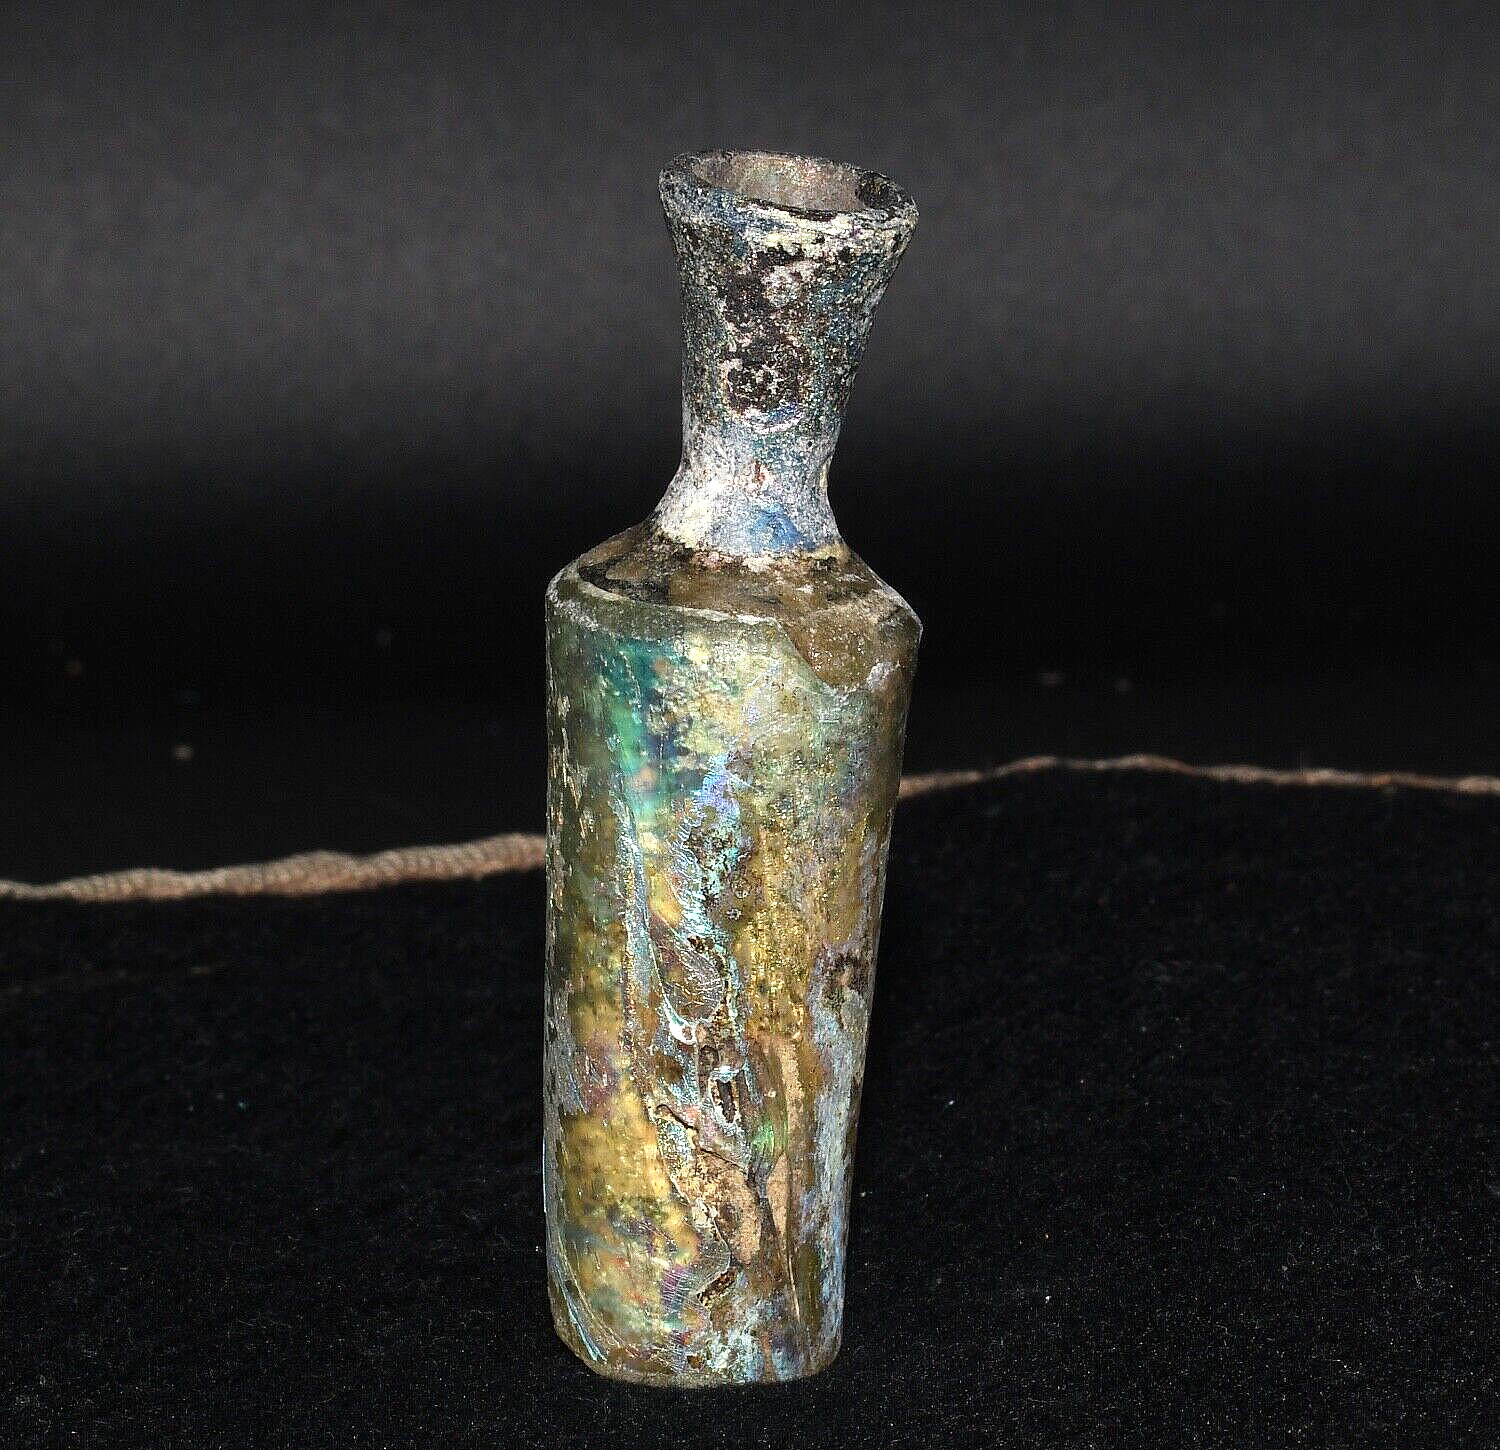 Authentic Ancient Roman Glass Bottle Vessel in Good Condition from Middle East